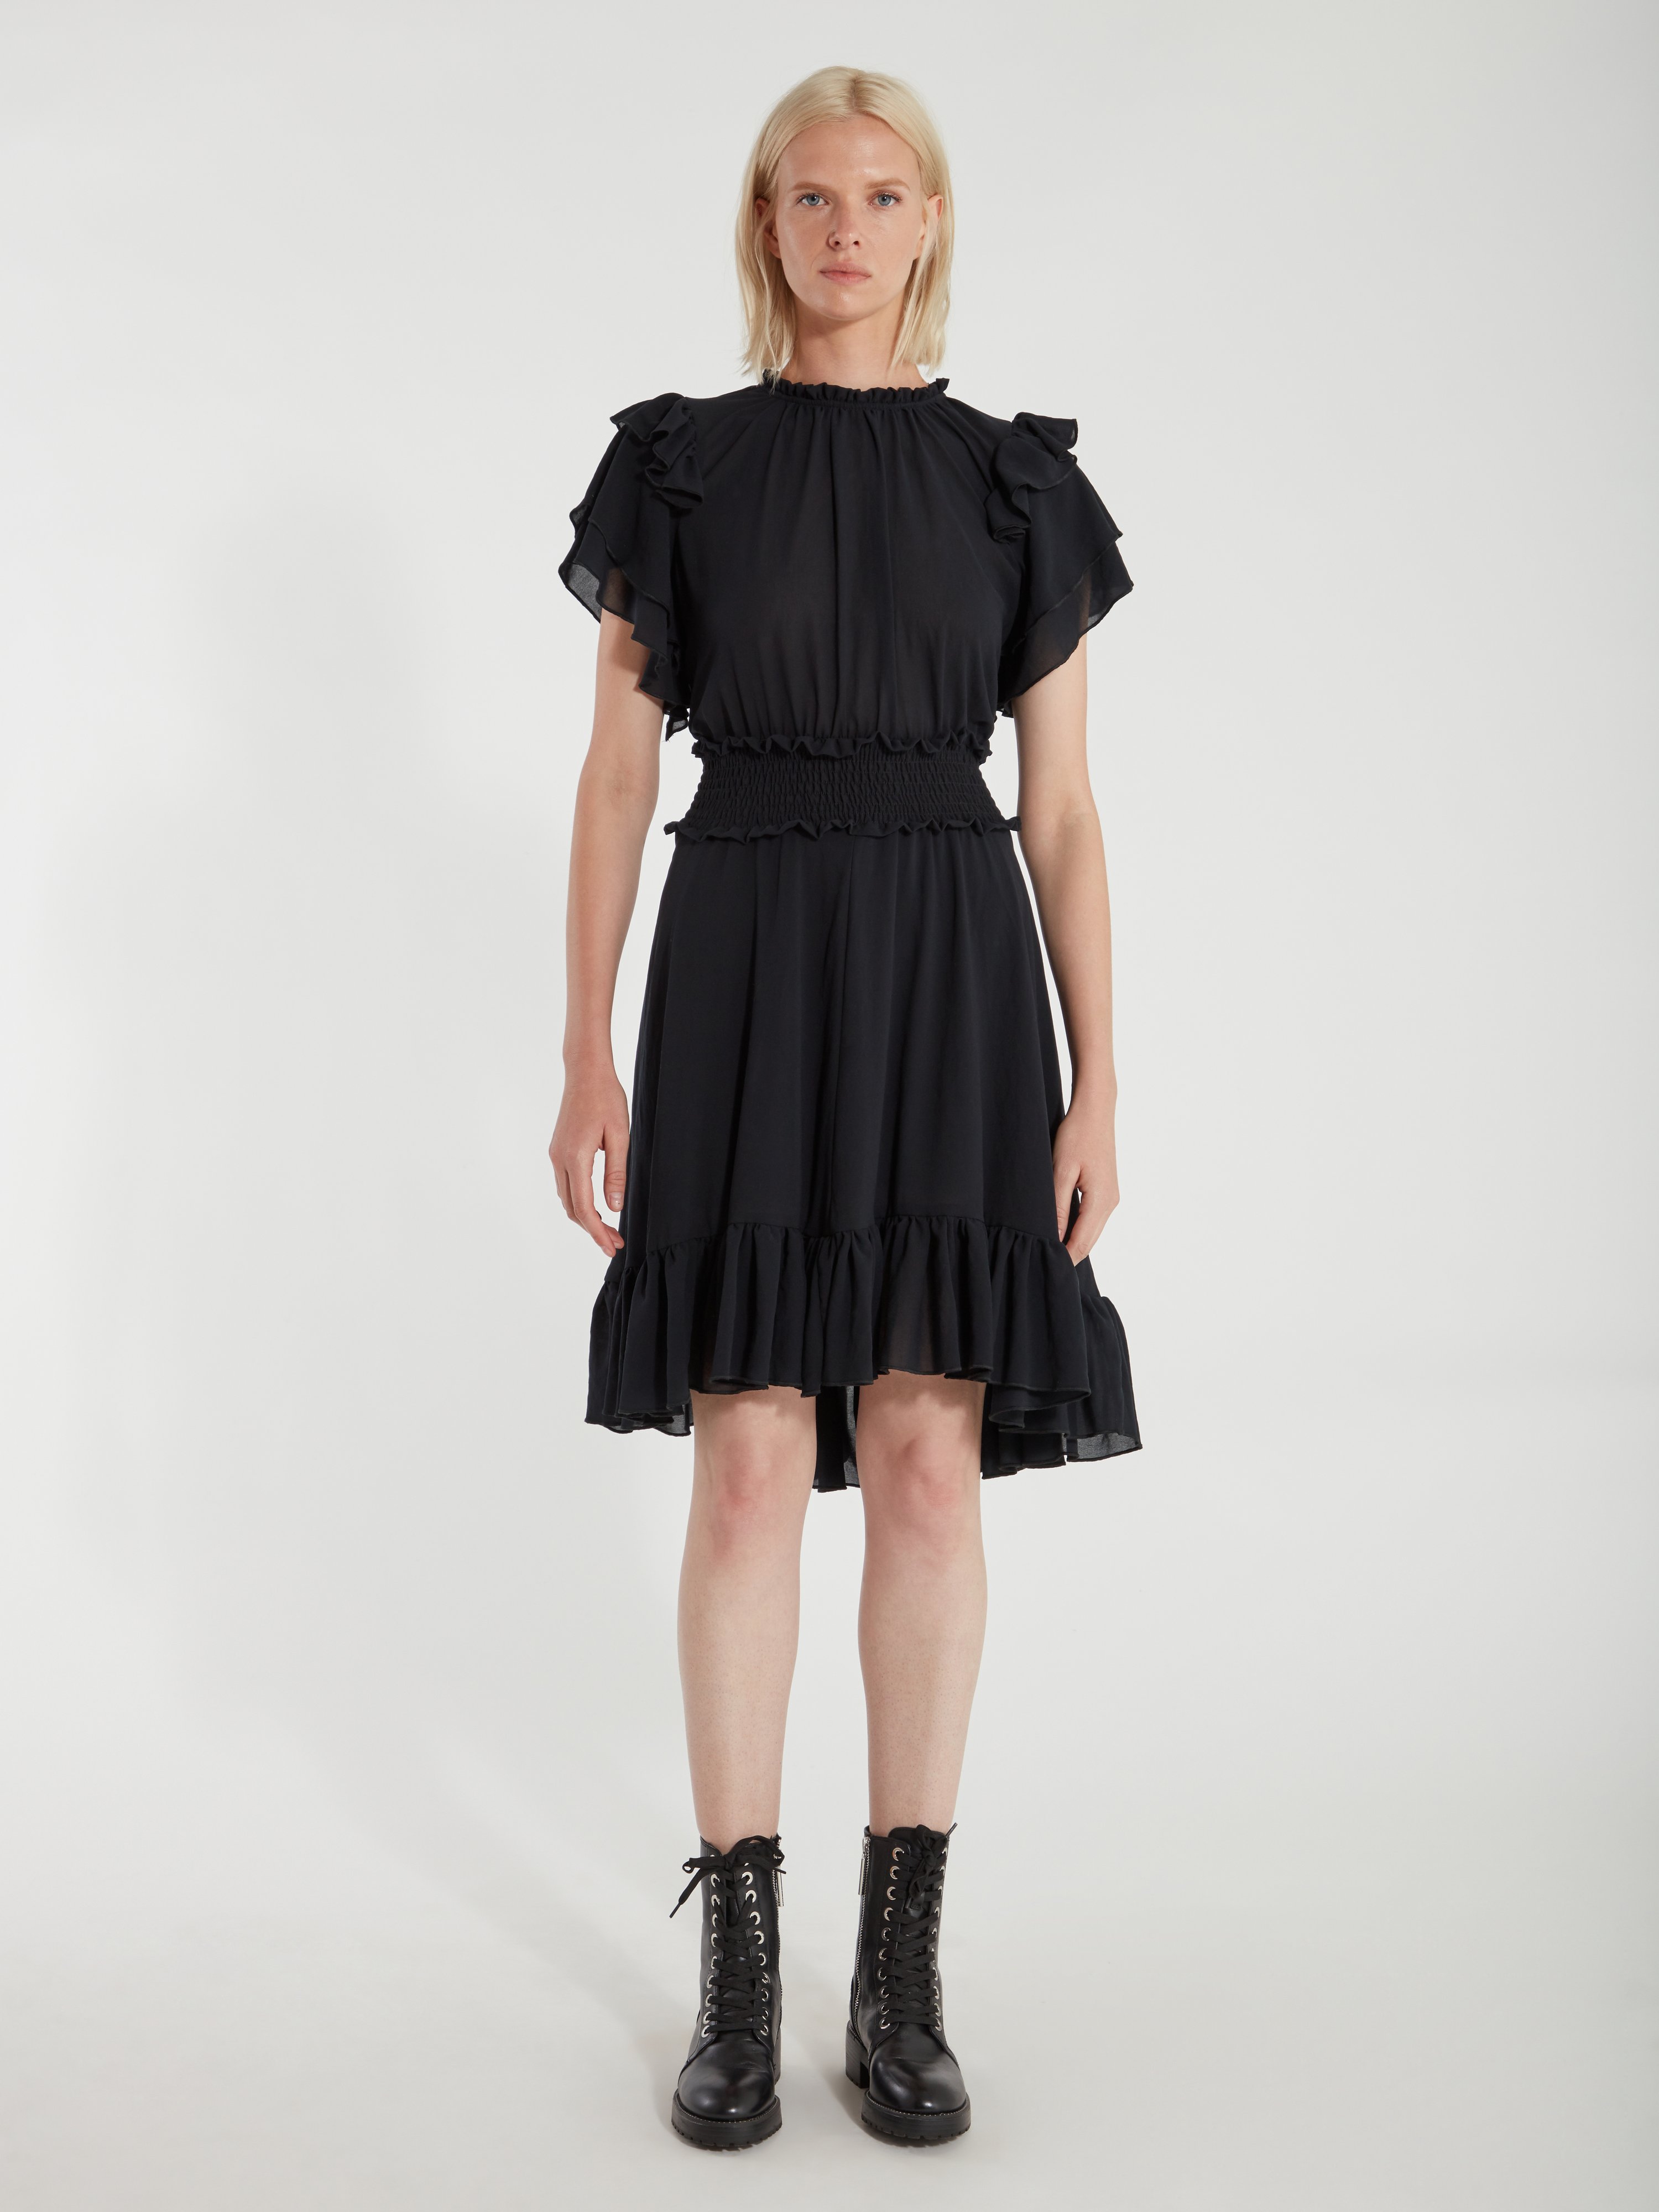 ICONS OBJECTS OF DEVOTION ICONS OBJECTS OF DEVOTION THE RUFFLE SMOCK MINI DRESS